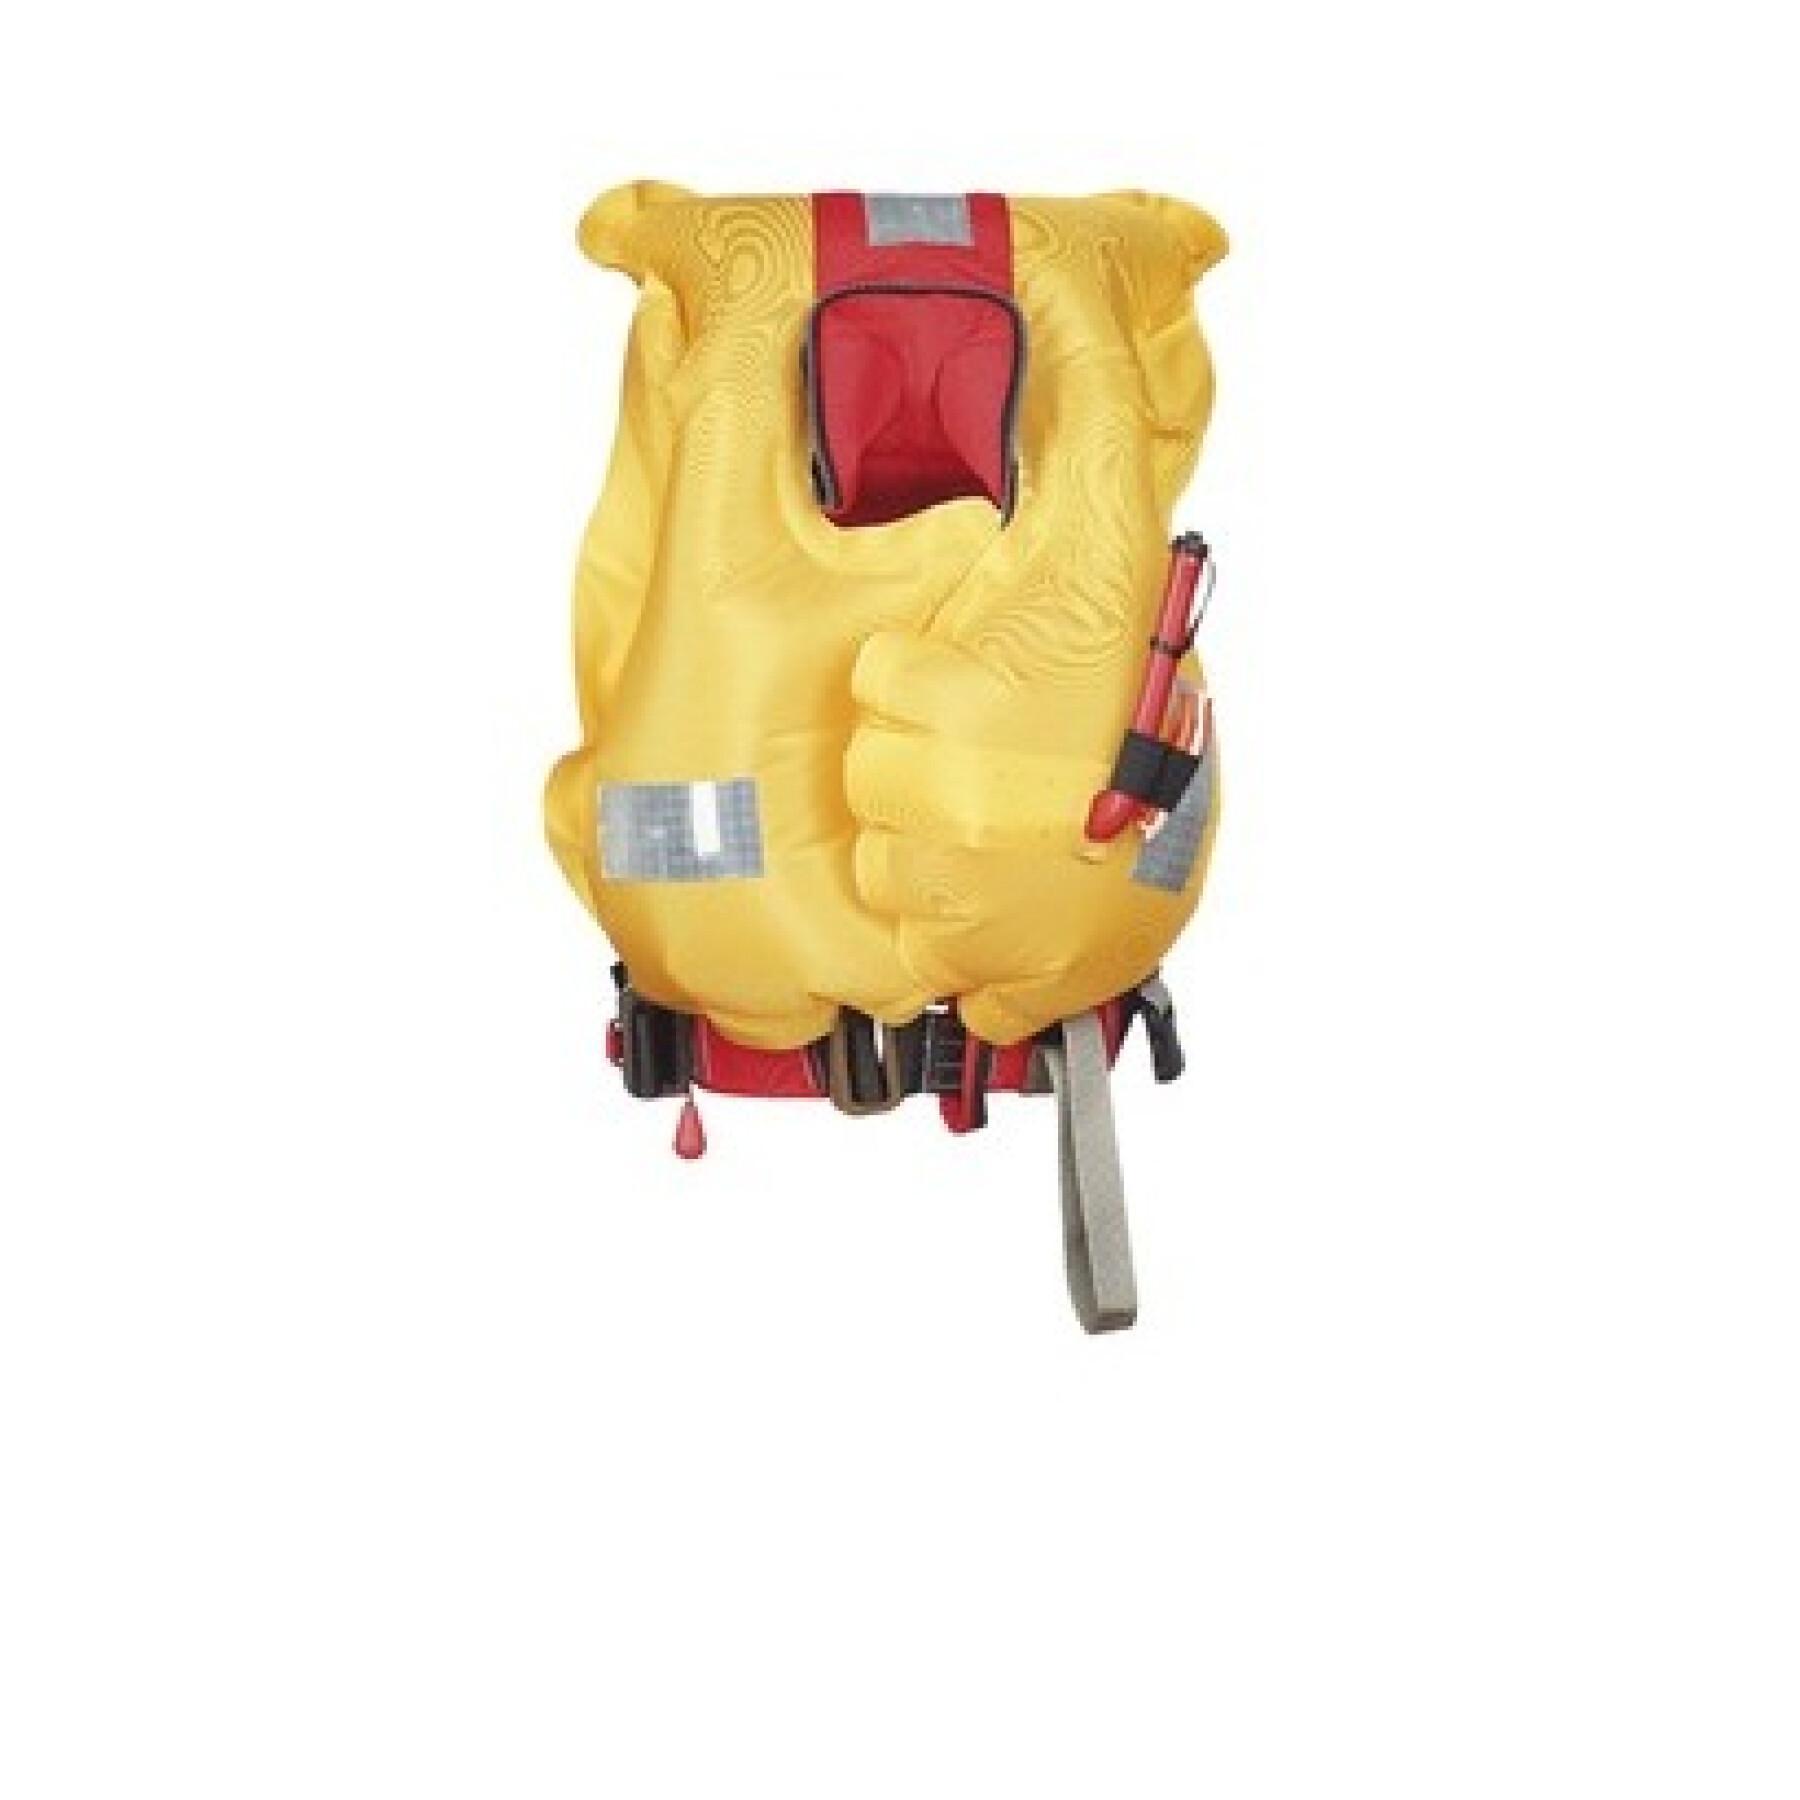 Automatic lifejacket with child harness Crewsaver Crewfit 150N